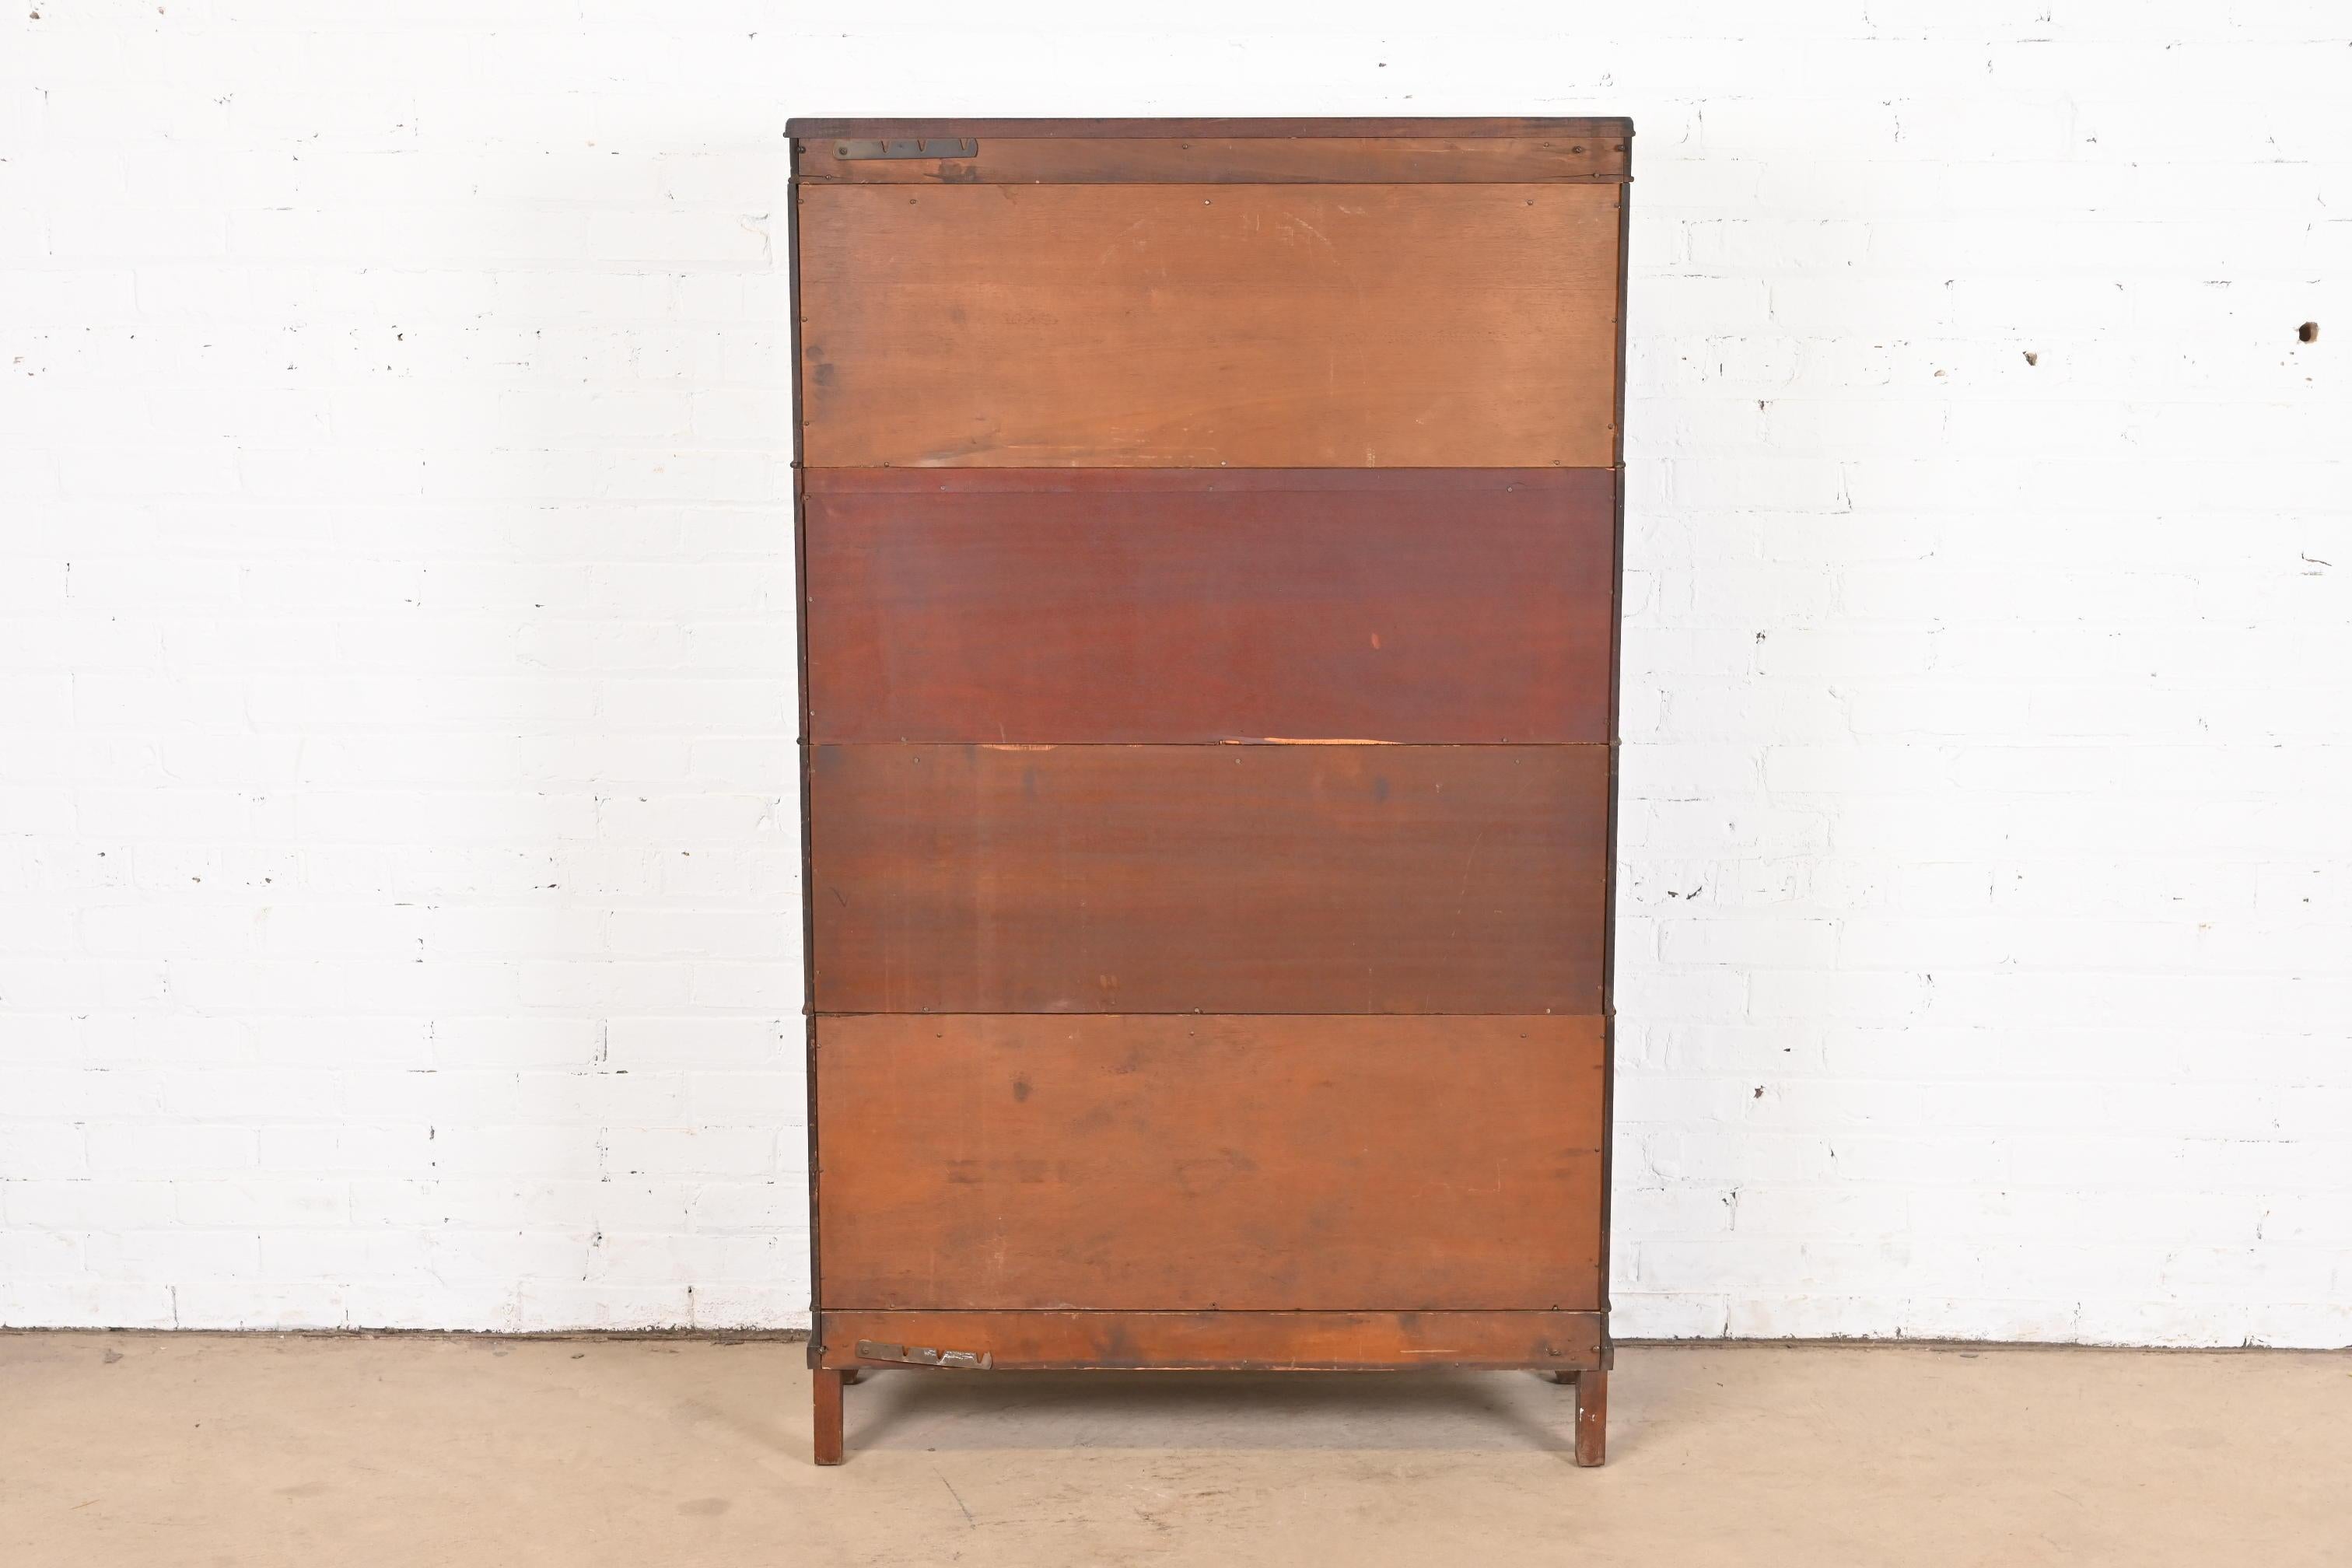 Antique Arts & Crafts Mahogany Four-Stack Barrister Bookcase by Macey, 1920s For Sale 3